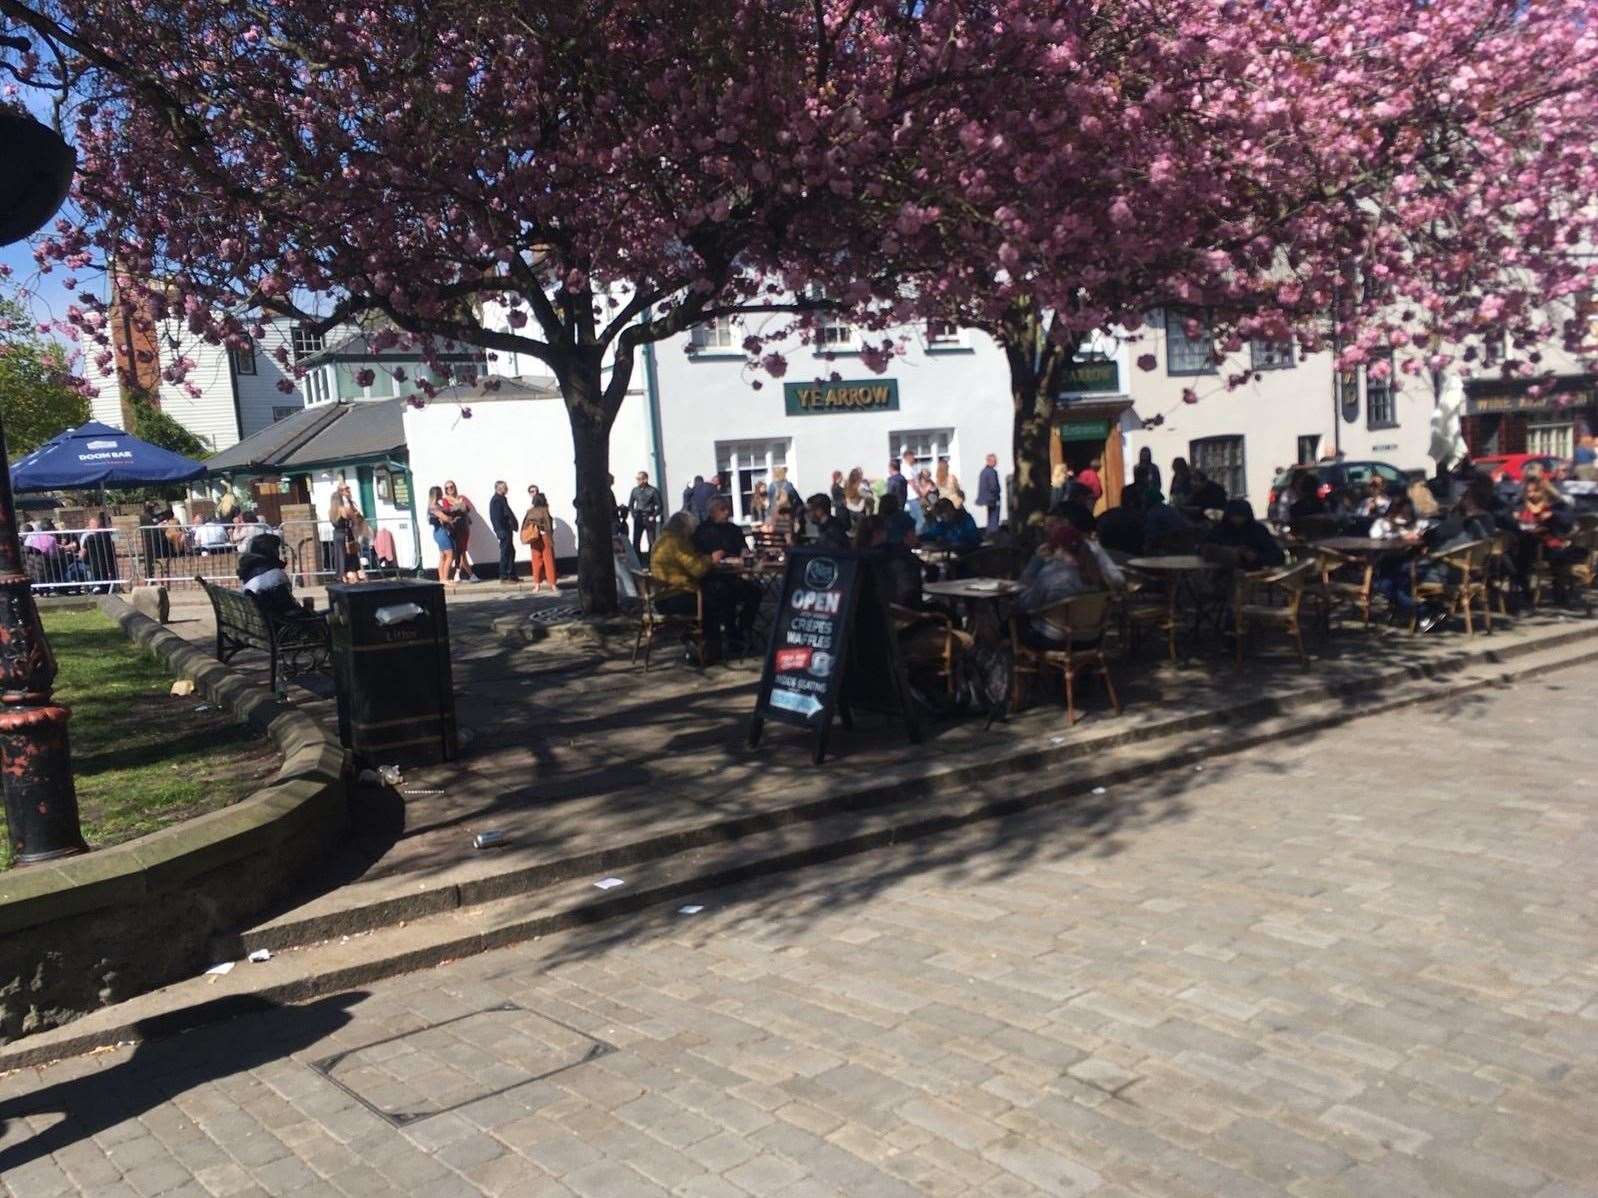 Lots of people were queuing to get an outside table at pubs in Rochester